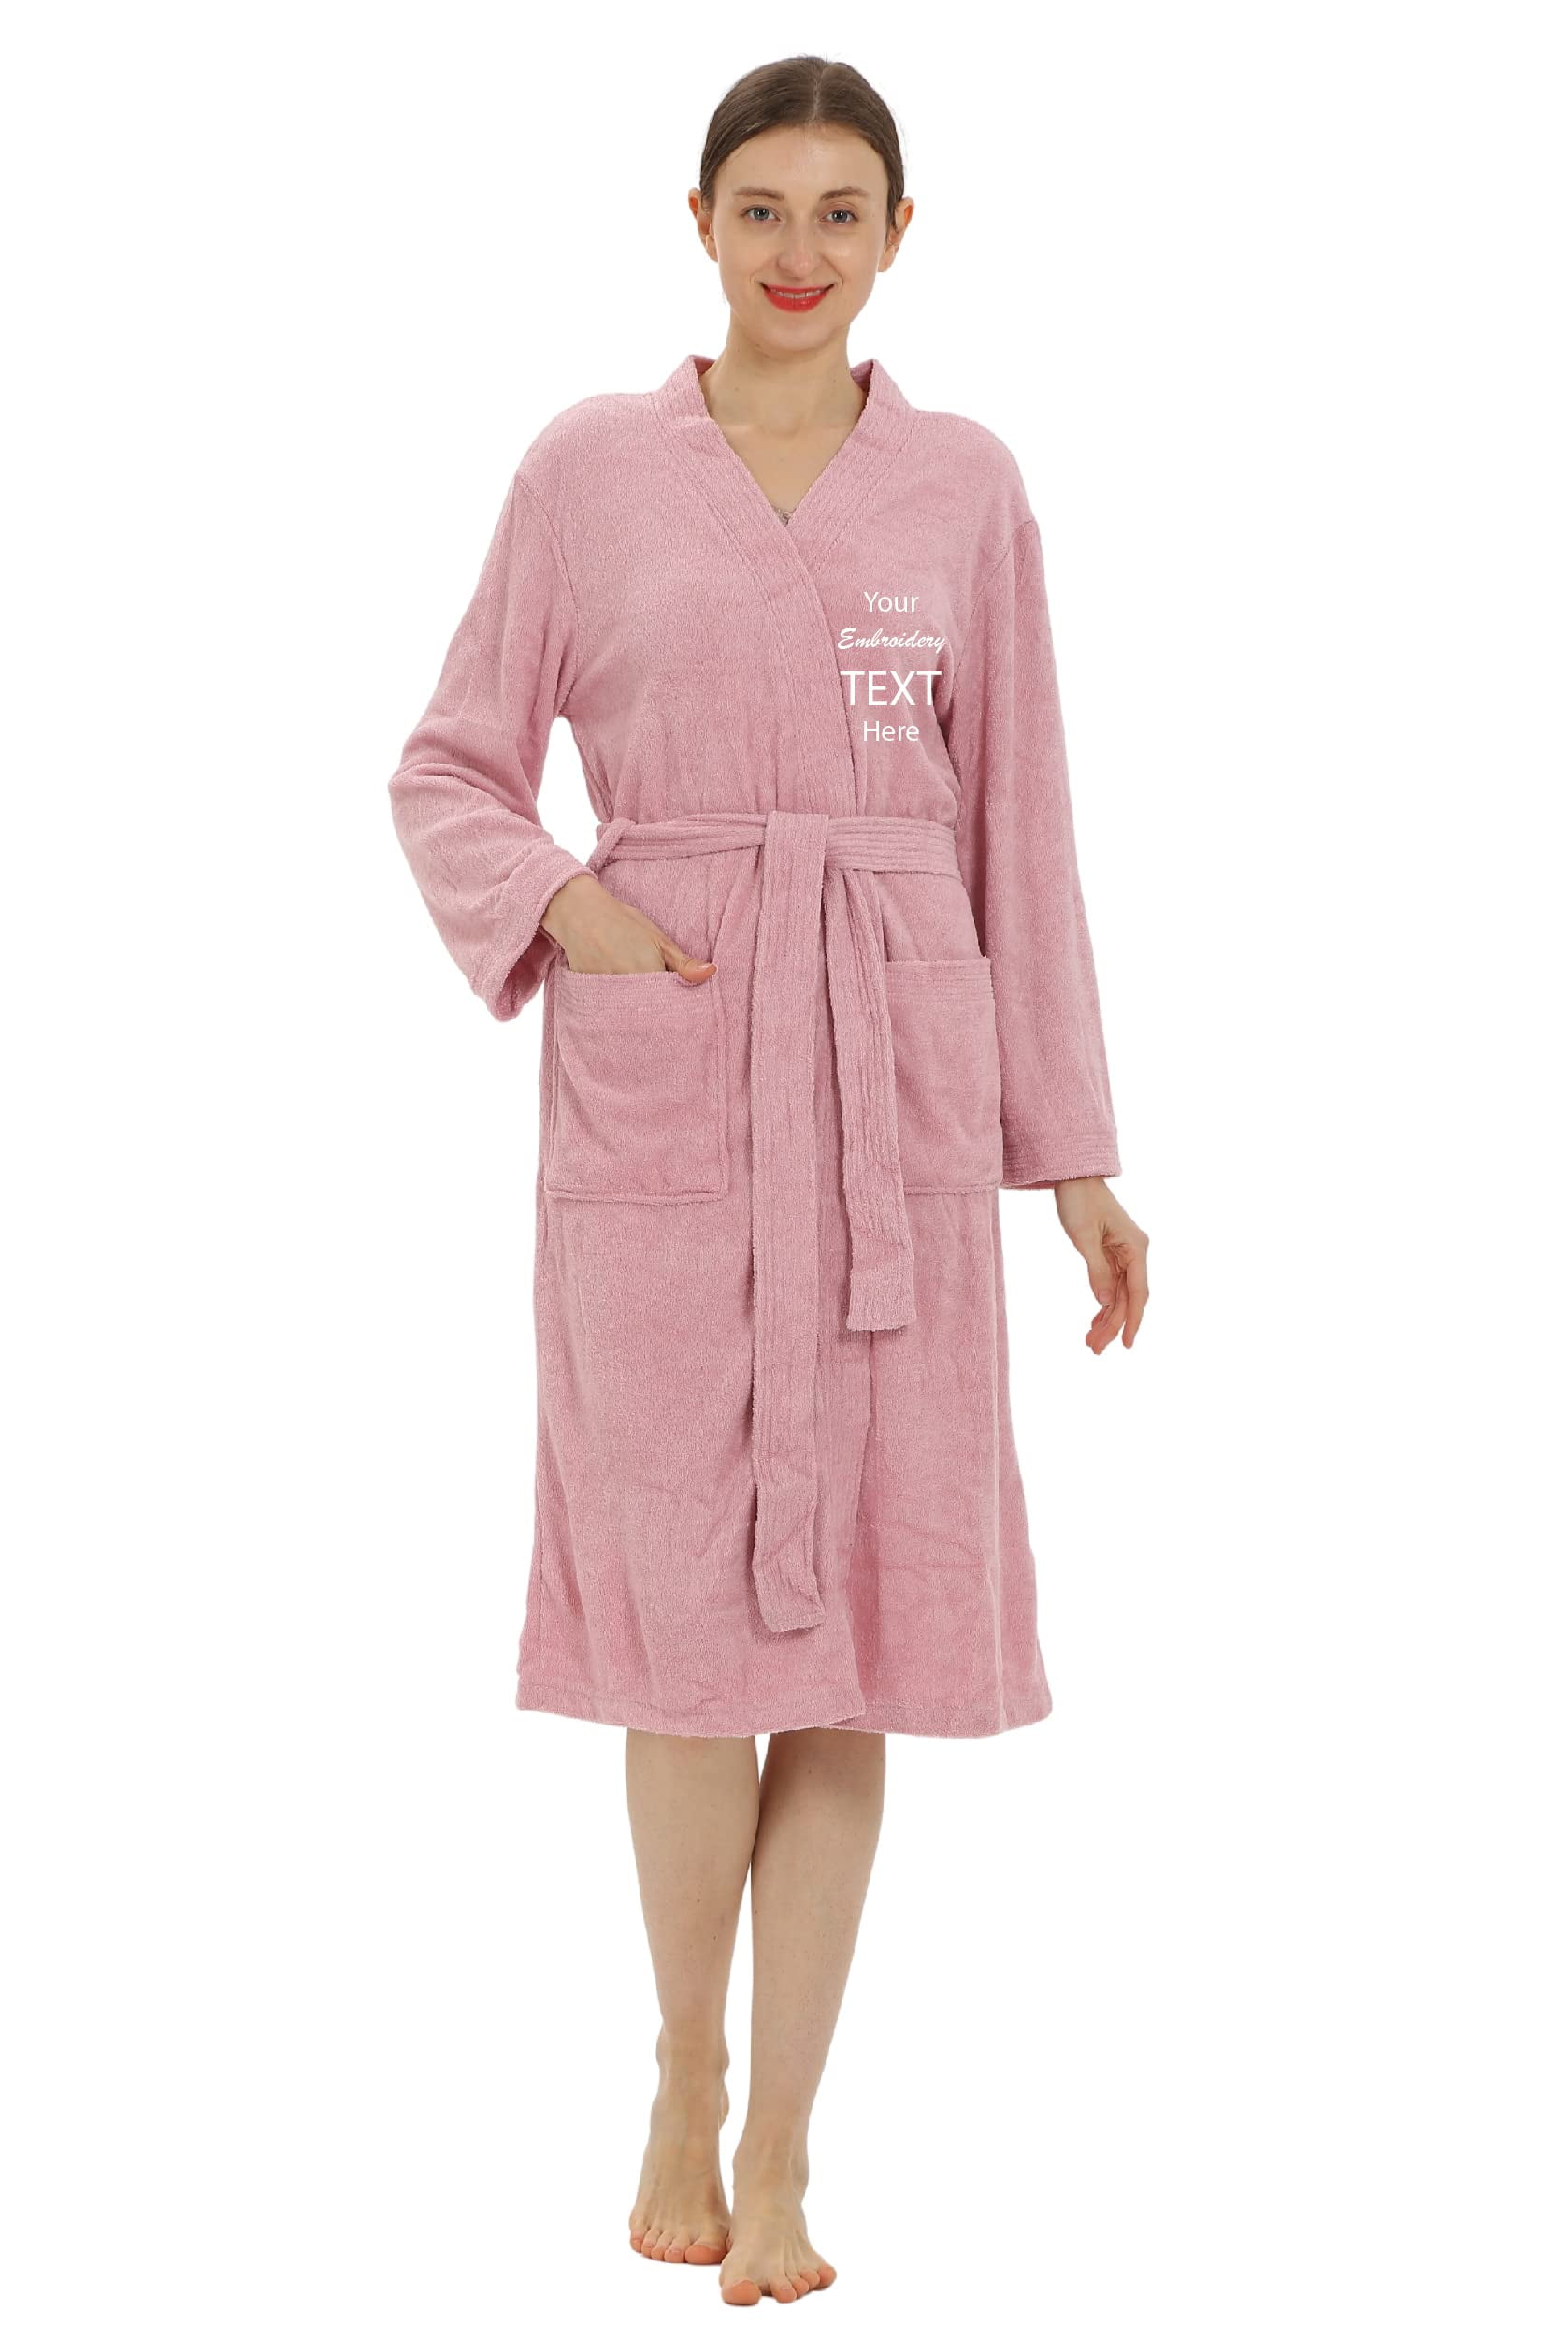 Monogrammed Long Terry Robe – Cotton Sisters